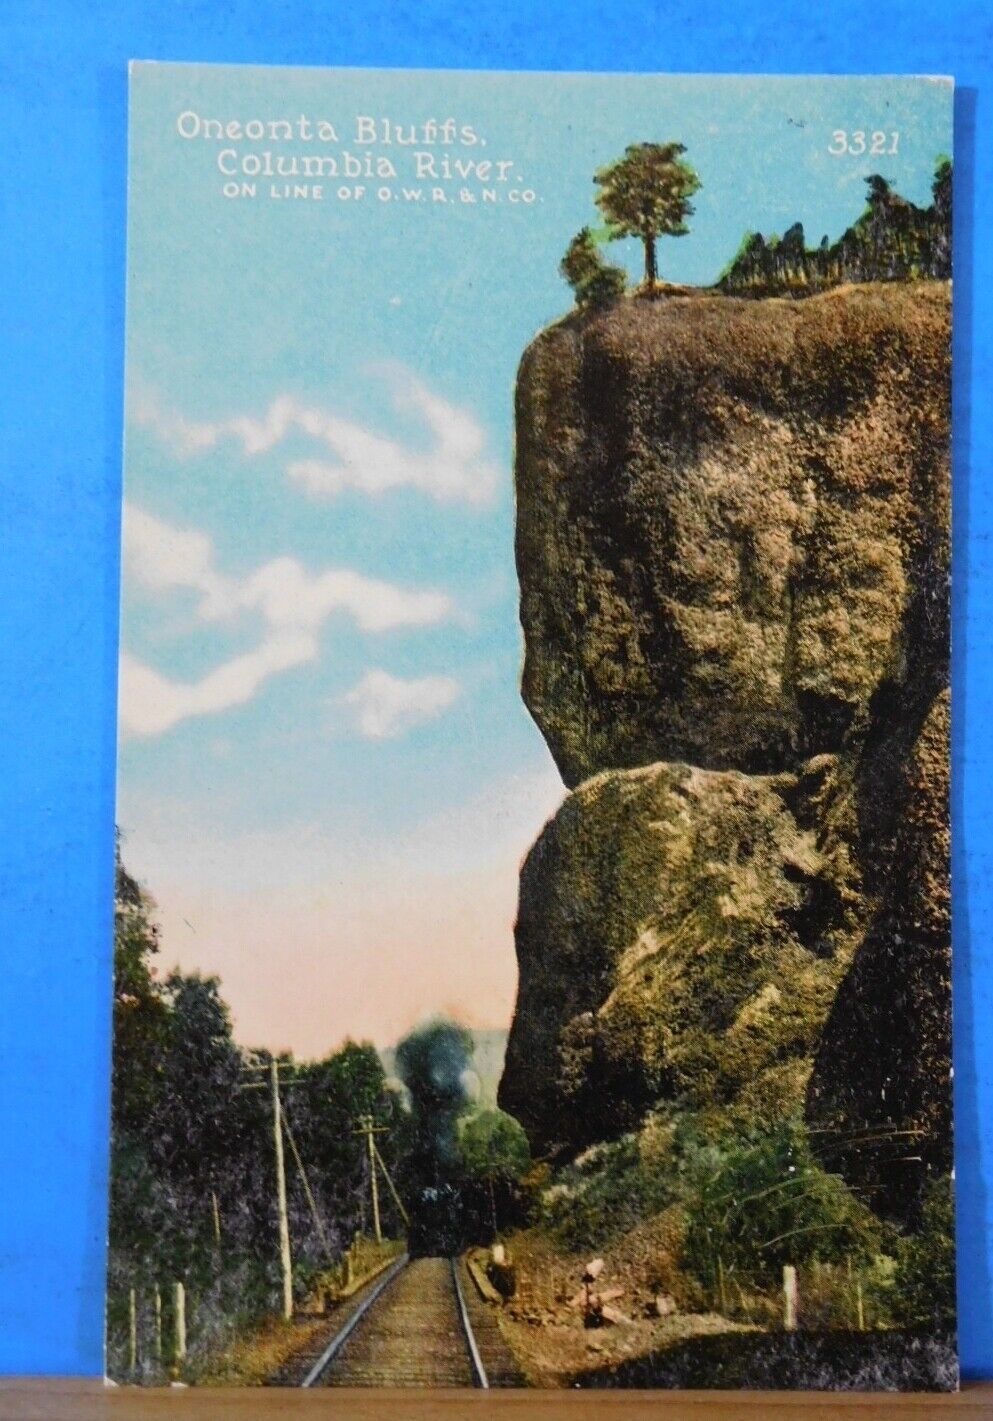 Postcard Oneonta Bluffs Columbia River On Line of O.W.R. & N. Co.